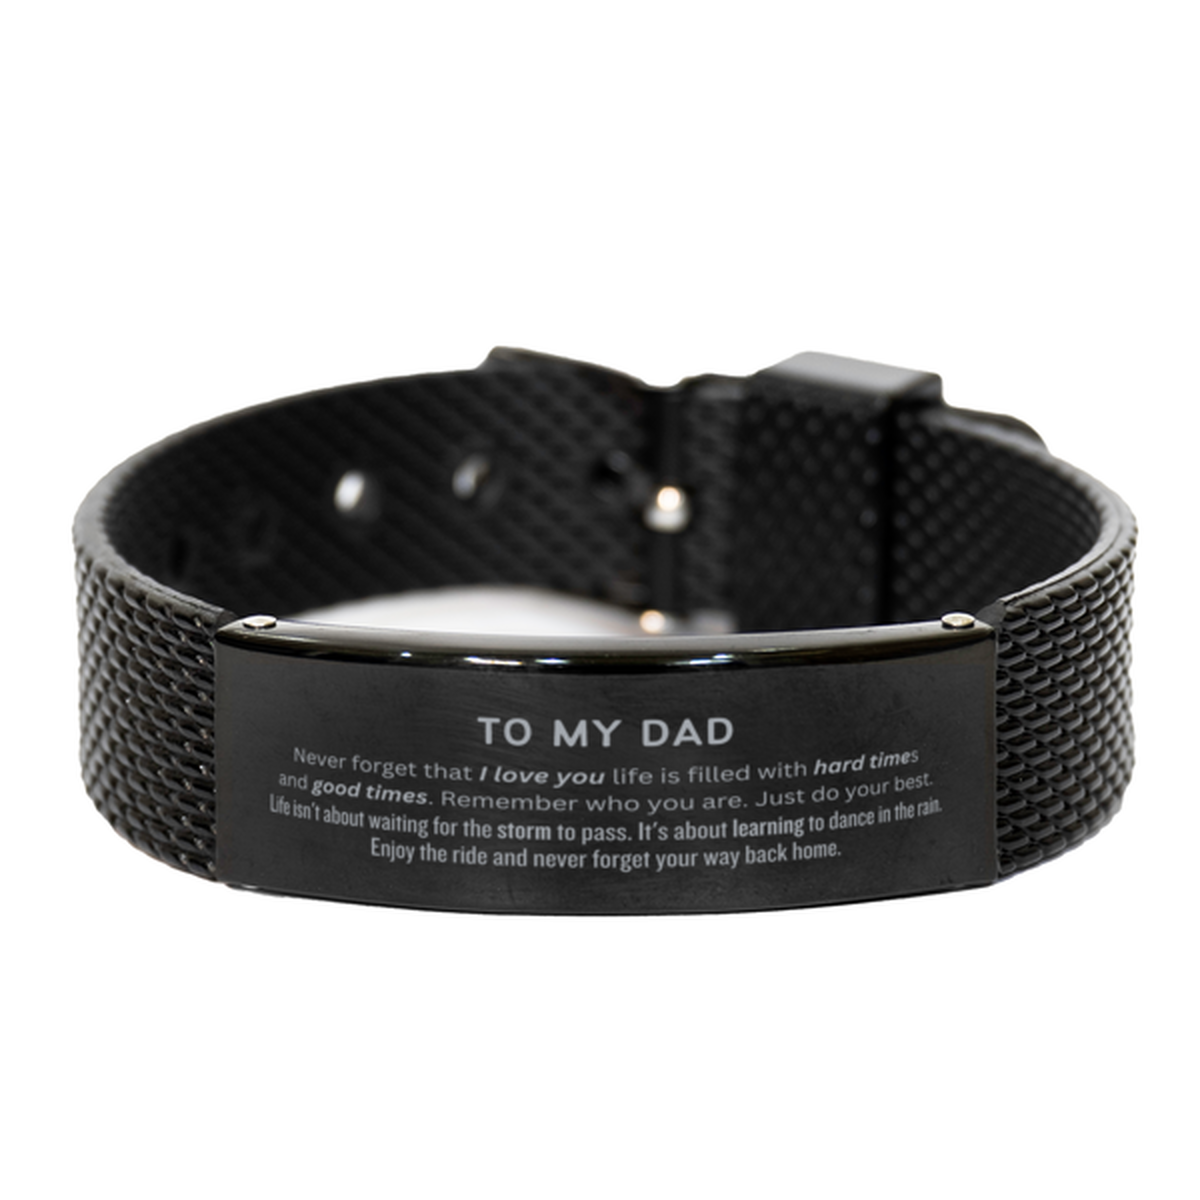 Christmas Dad Black Shark Mesh Bracelet Gifts, To My Dad Birthday Thank You Gifts For Dad, Graduation Unique Gifts For Dad To My Dad Never forget that I love you life is filled with hard times and good times. Remember who you are. Just do your best